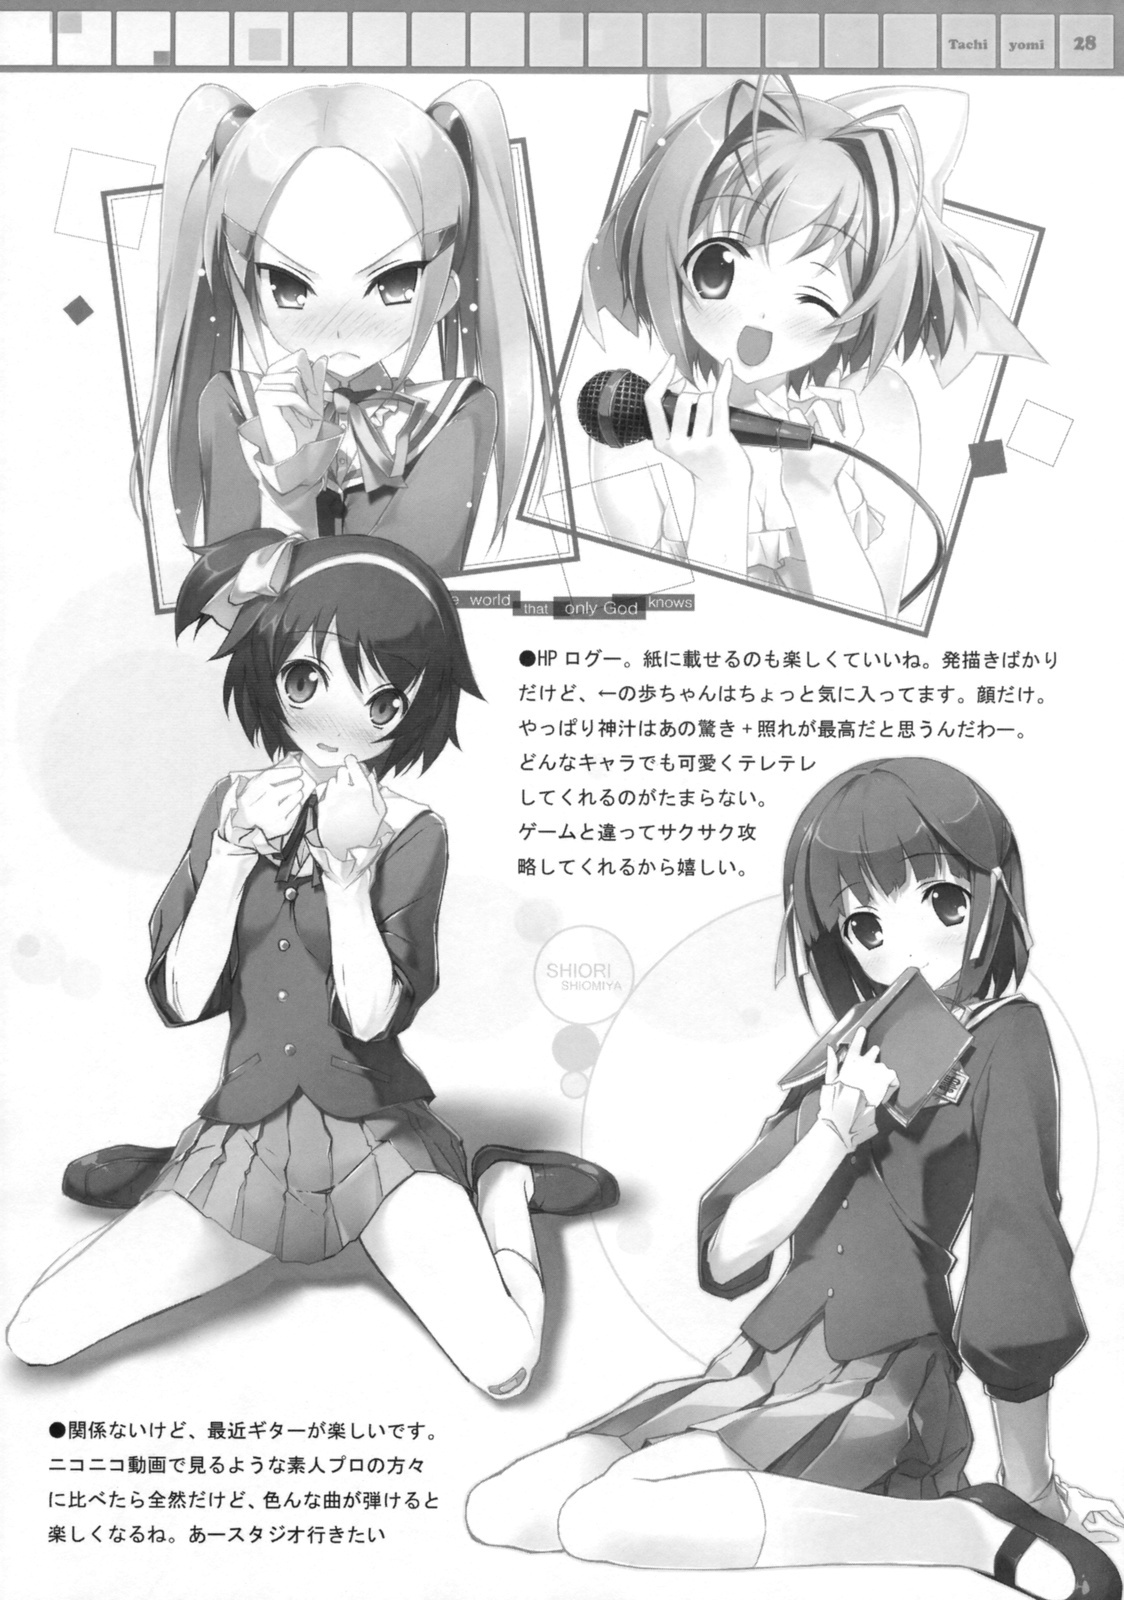 (COMIC1☆3) [Afterschool of the 5th year (Kantoku)] Tachiyomi Senyou Vol. 28 | 서서읽기전용 (The World God Only Knows) [Korean] page 15 full